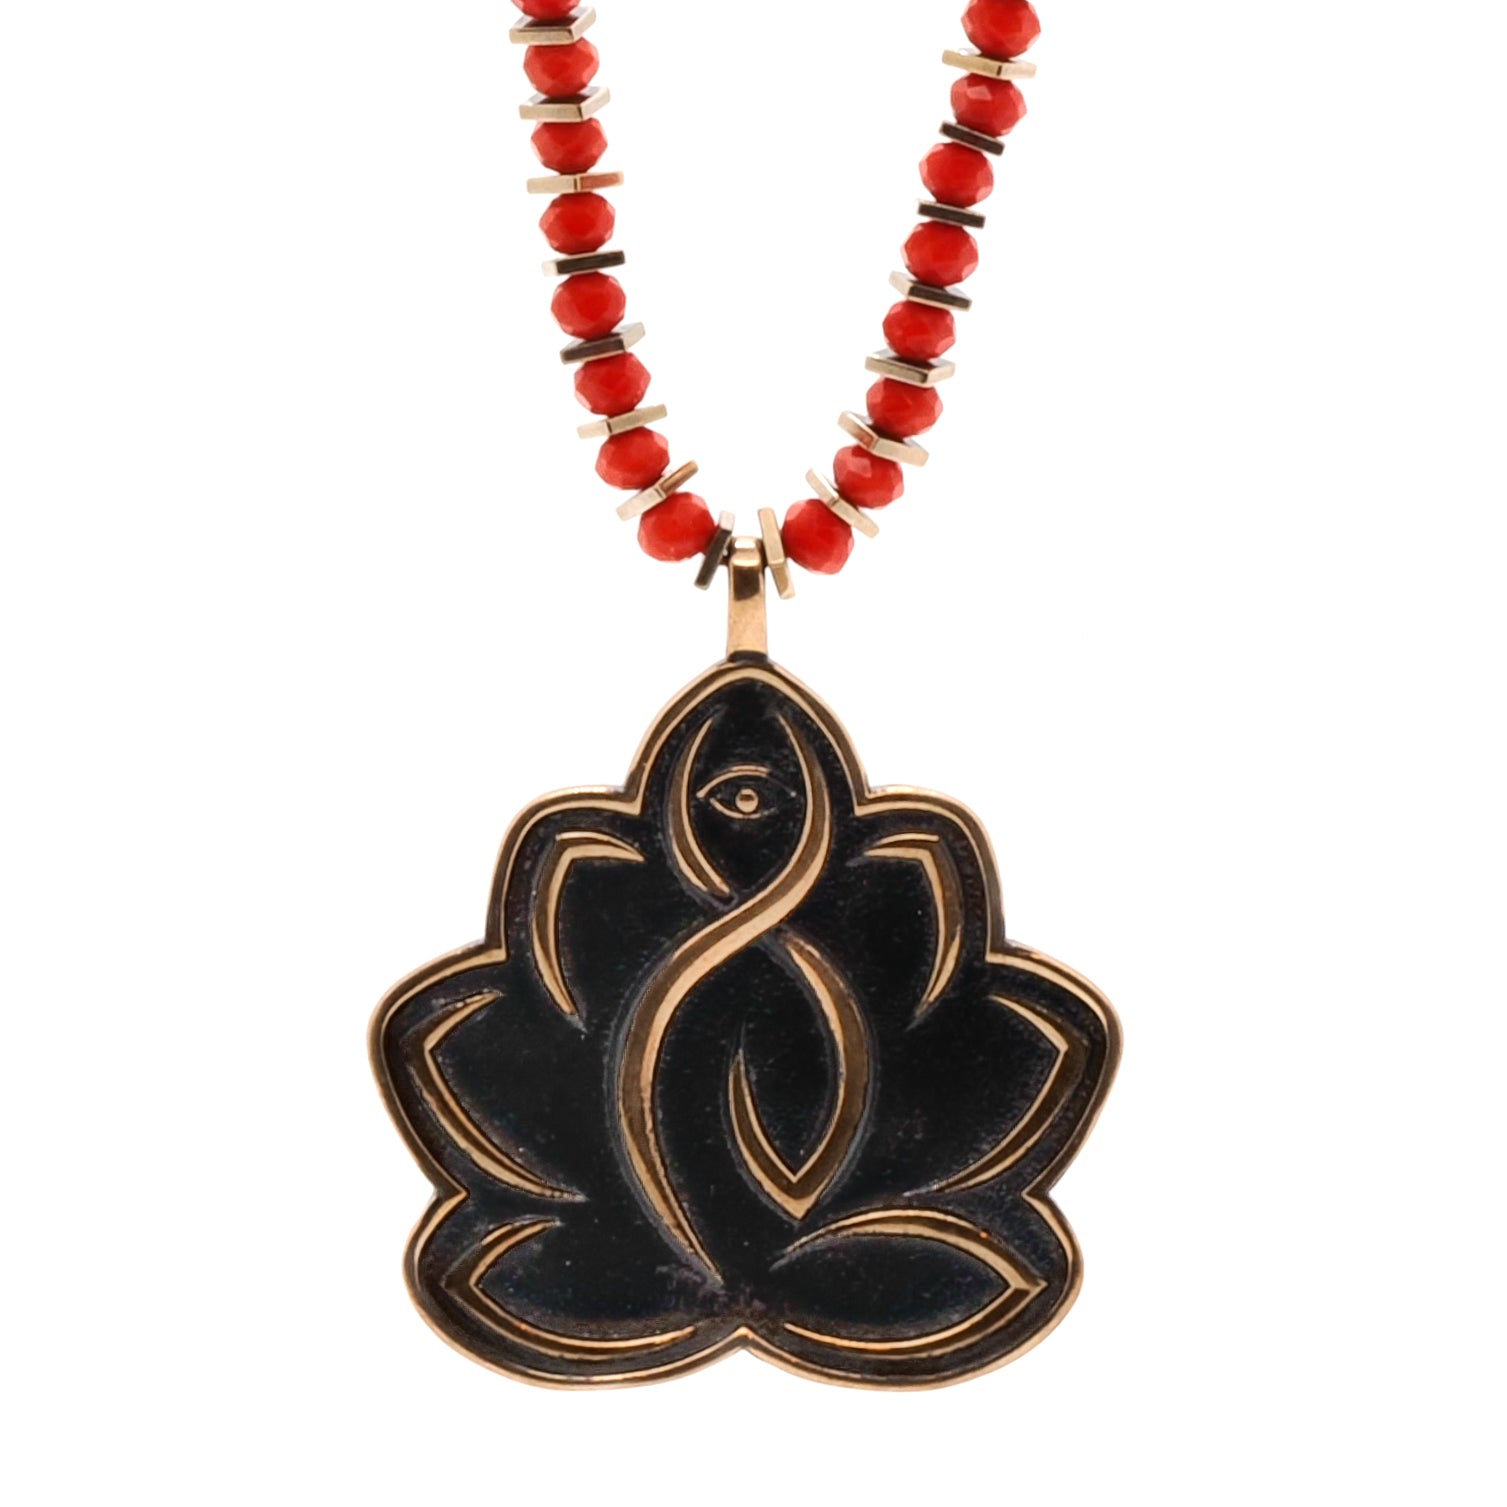 Symbolize purity and enlightenment with the lotus flower pendant